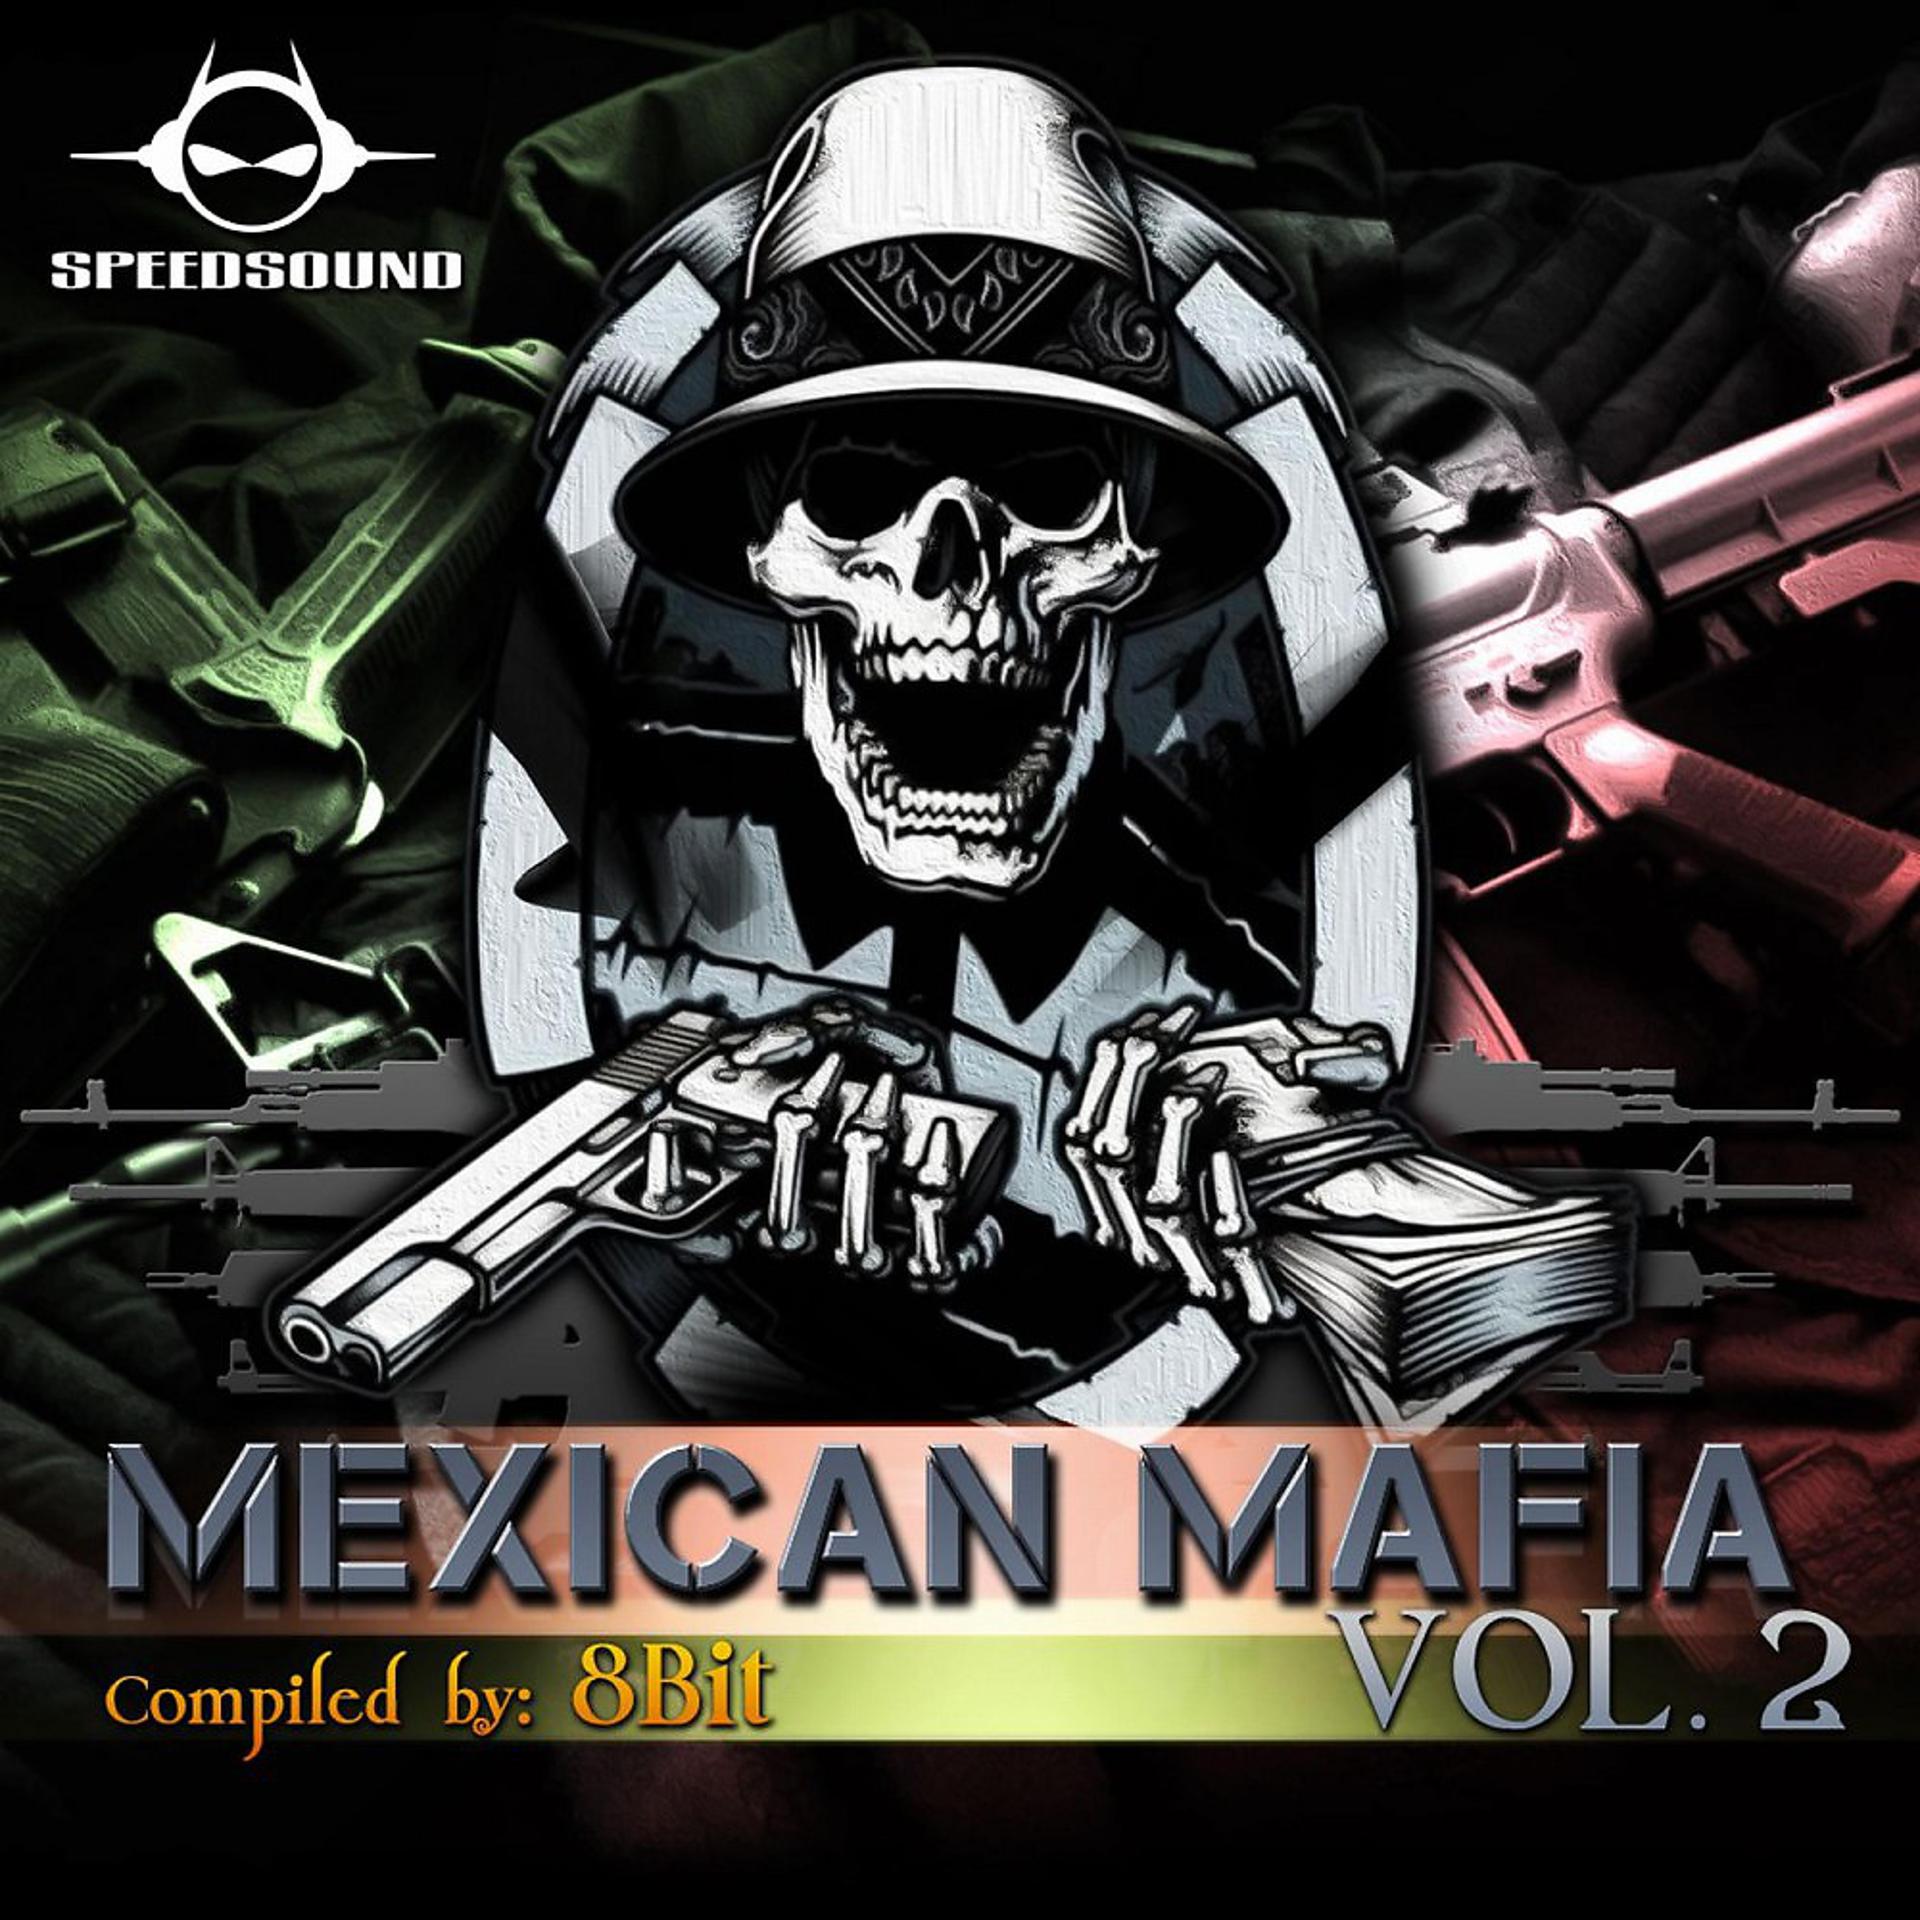 Постер альбома Mexican Mafia, Vol. 2, Compiled by 8Bit